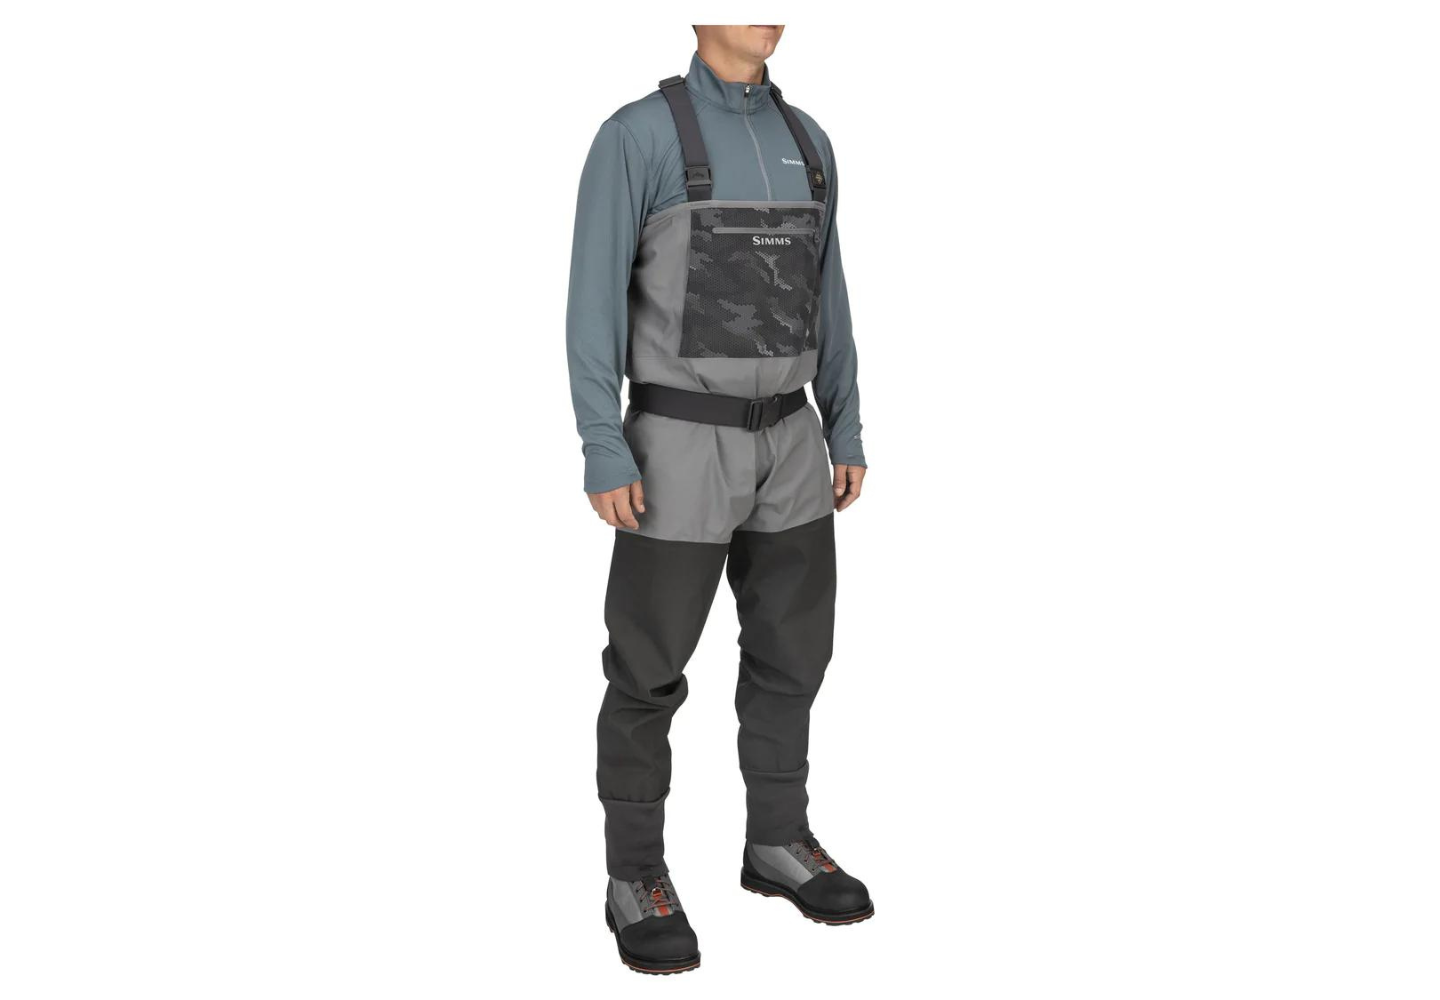 Simms stockingfoot waders for beginner fly fishing